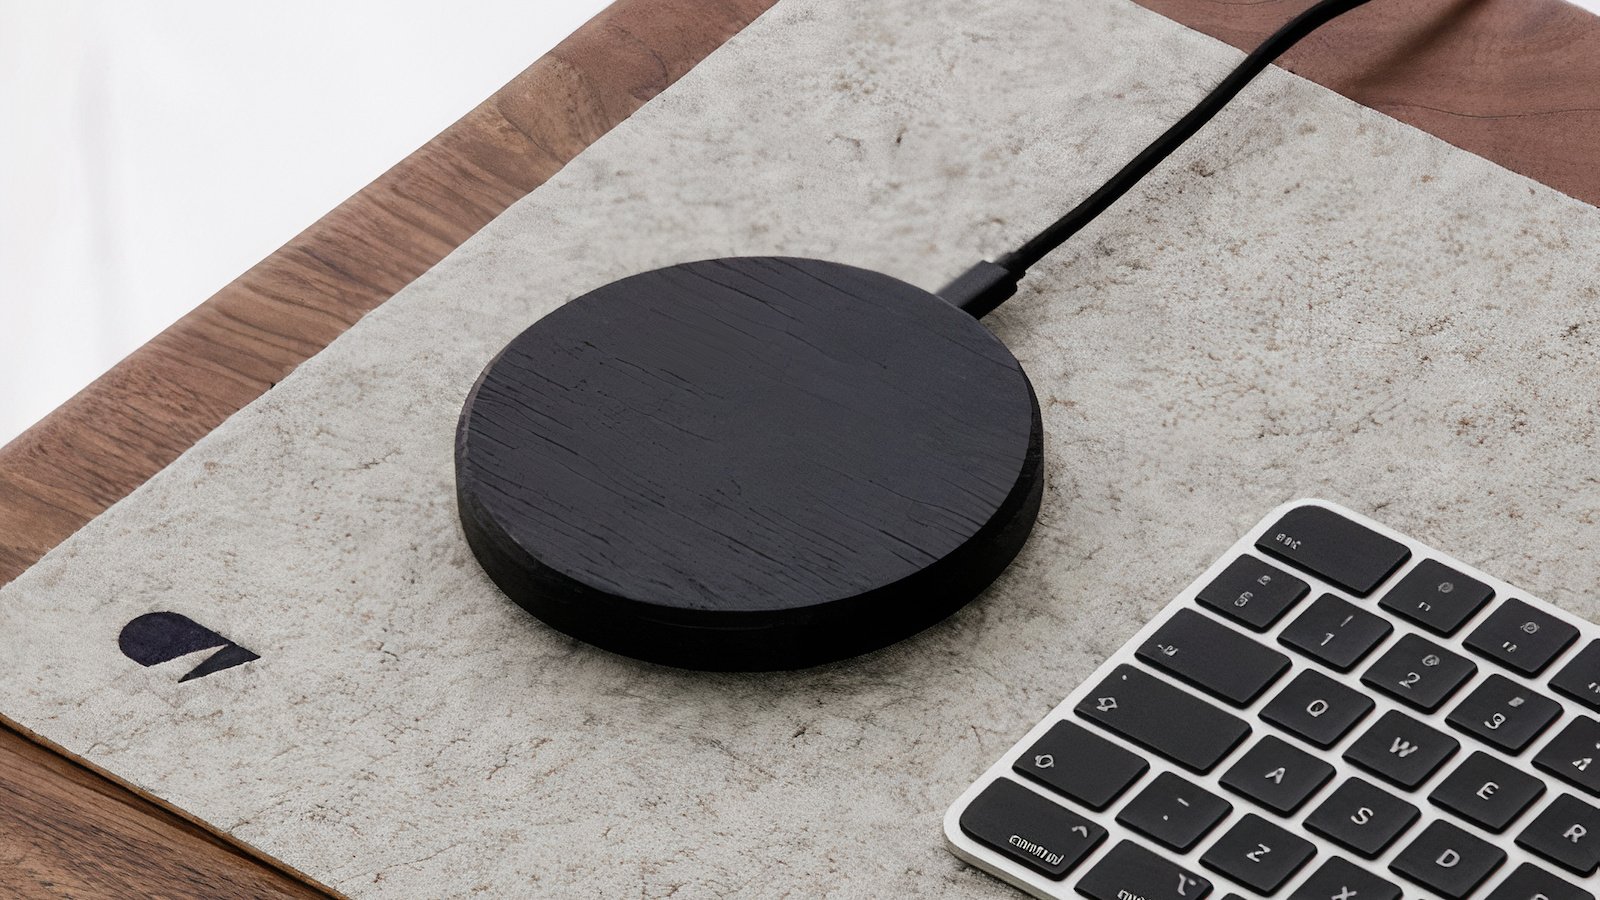 Oakywood Slim Charging Pad makes charging your mobile devices as easy as possible